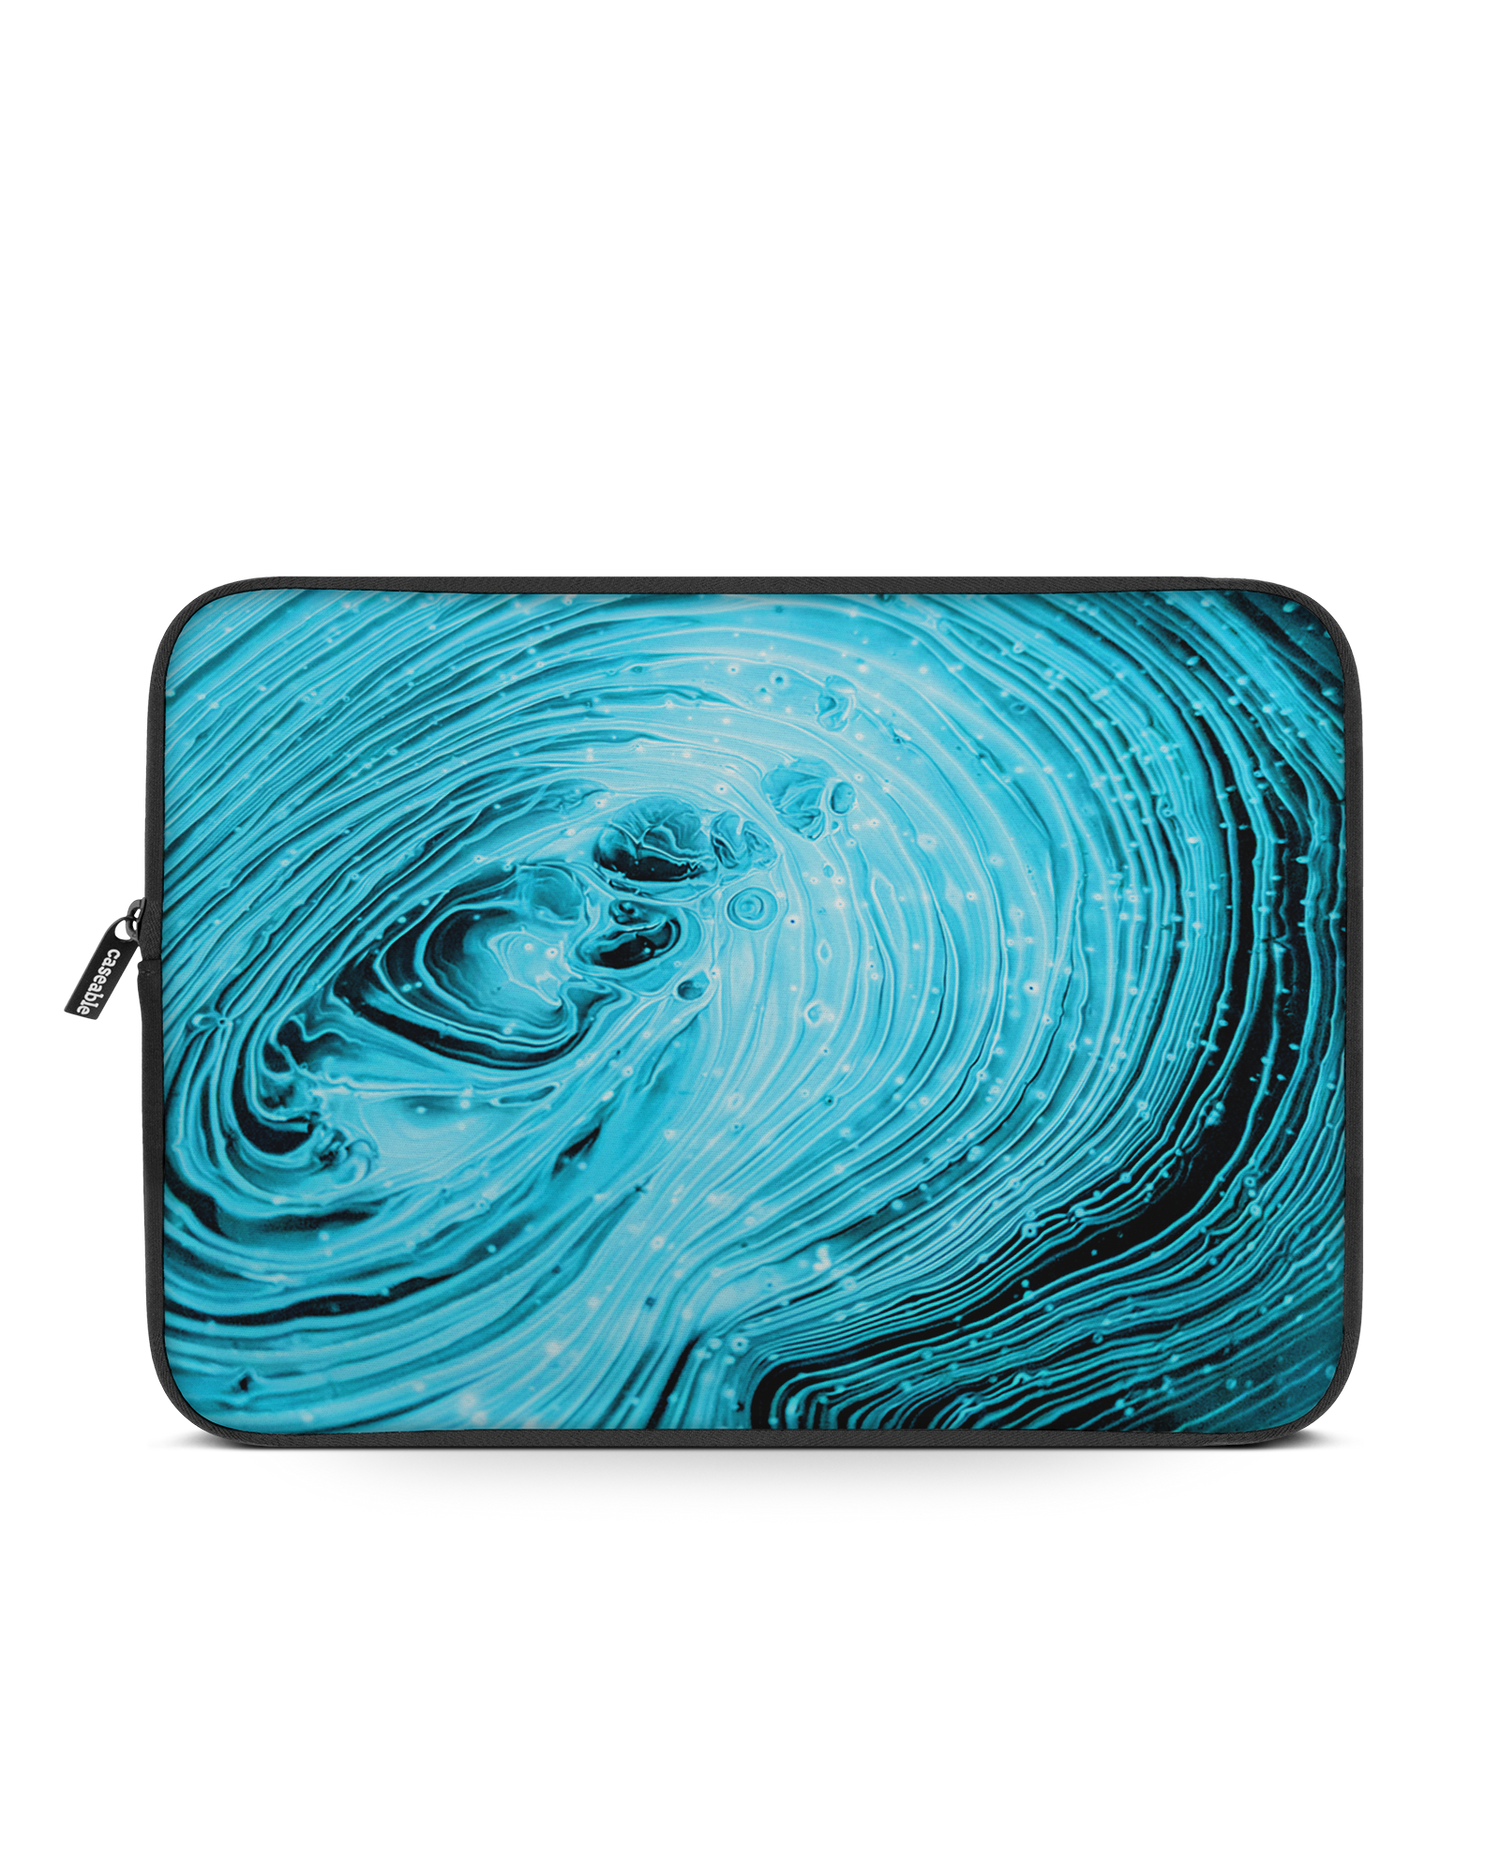 Turquoise Ripples Laptop Case 16 inch: Front View